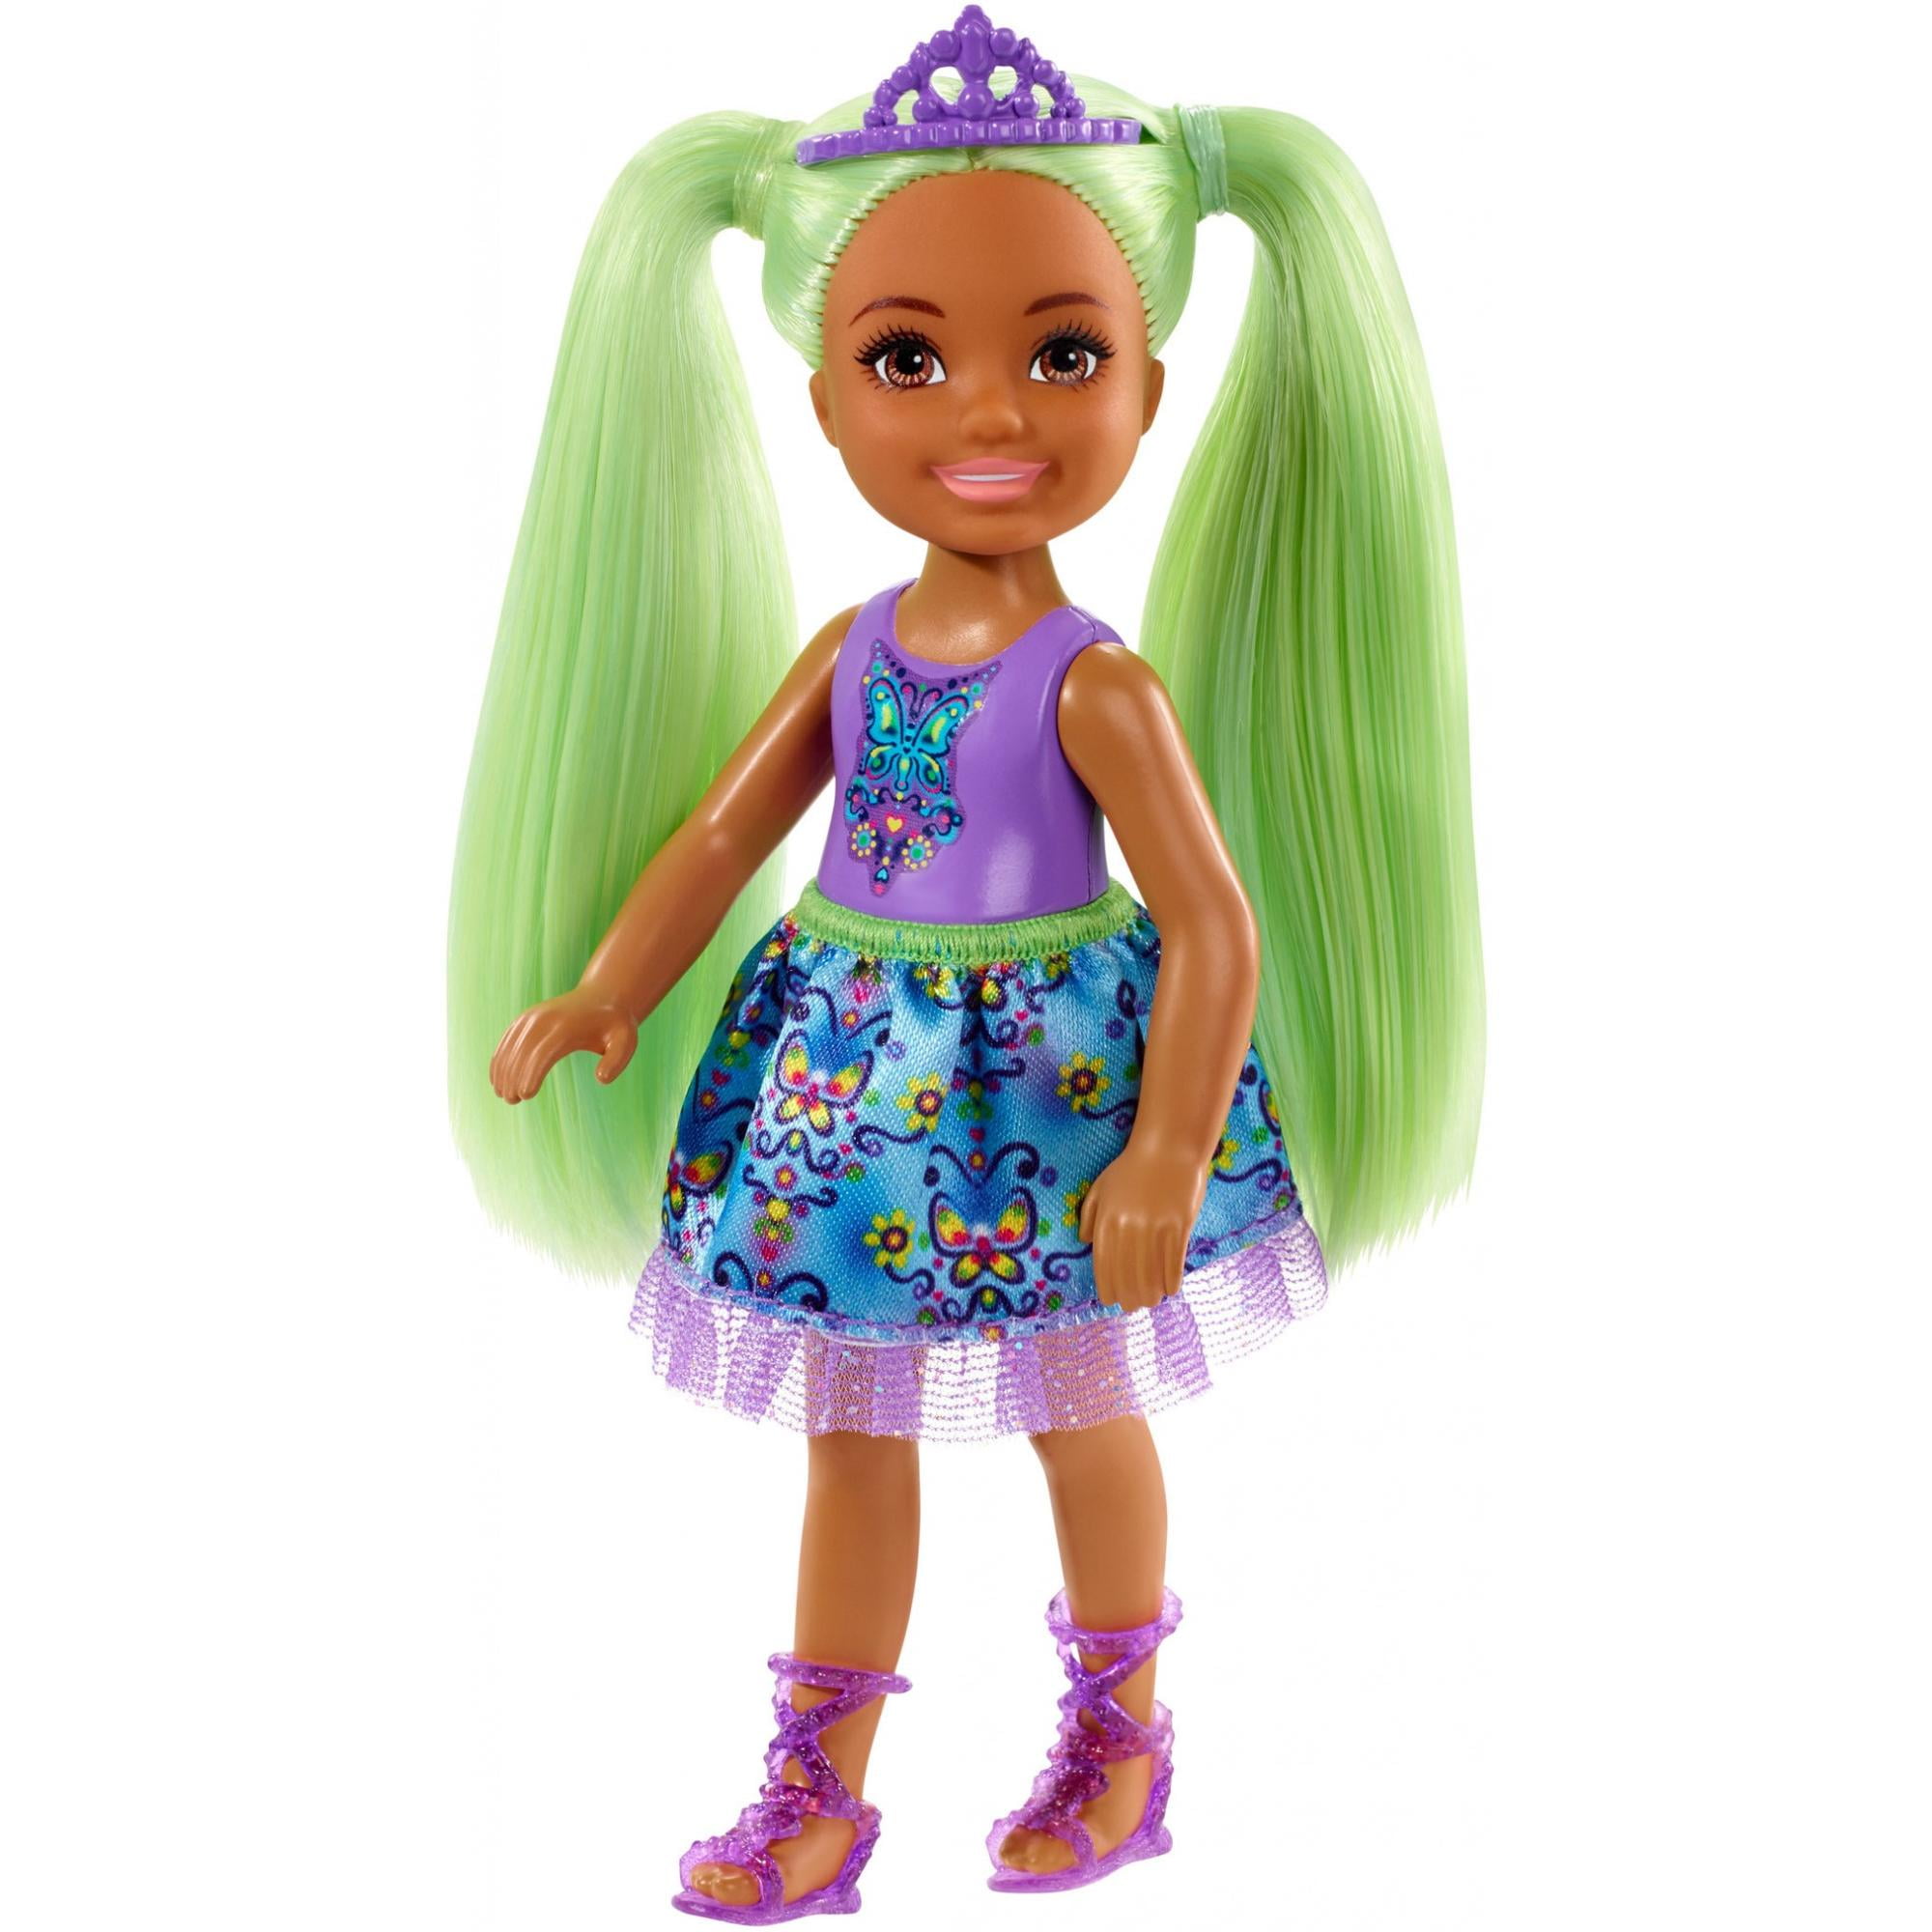 Barbie Dreamtopia Chelsea Sprite Doll, 7-Inch, With Green Hair Wearing